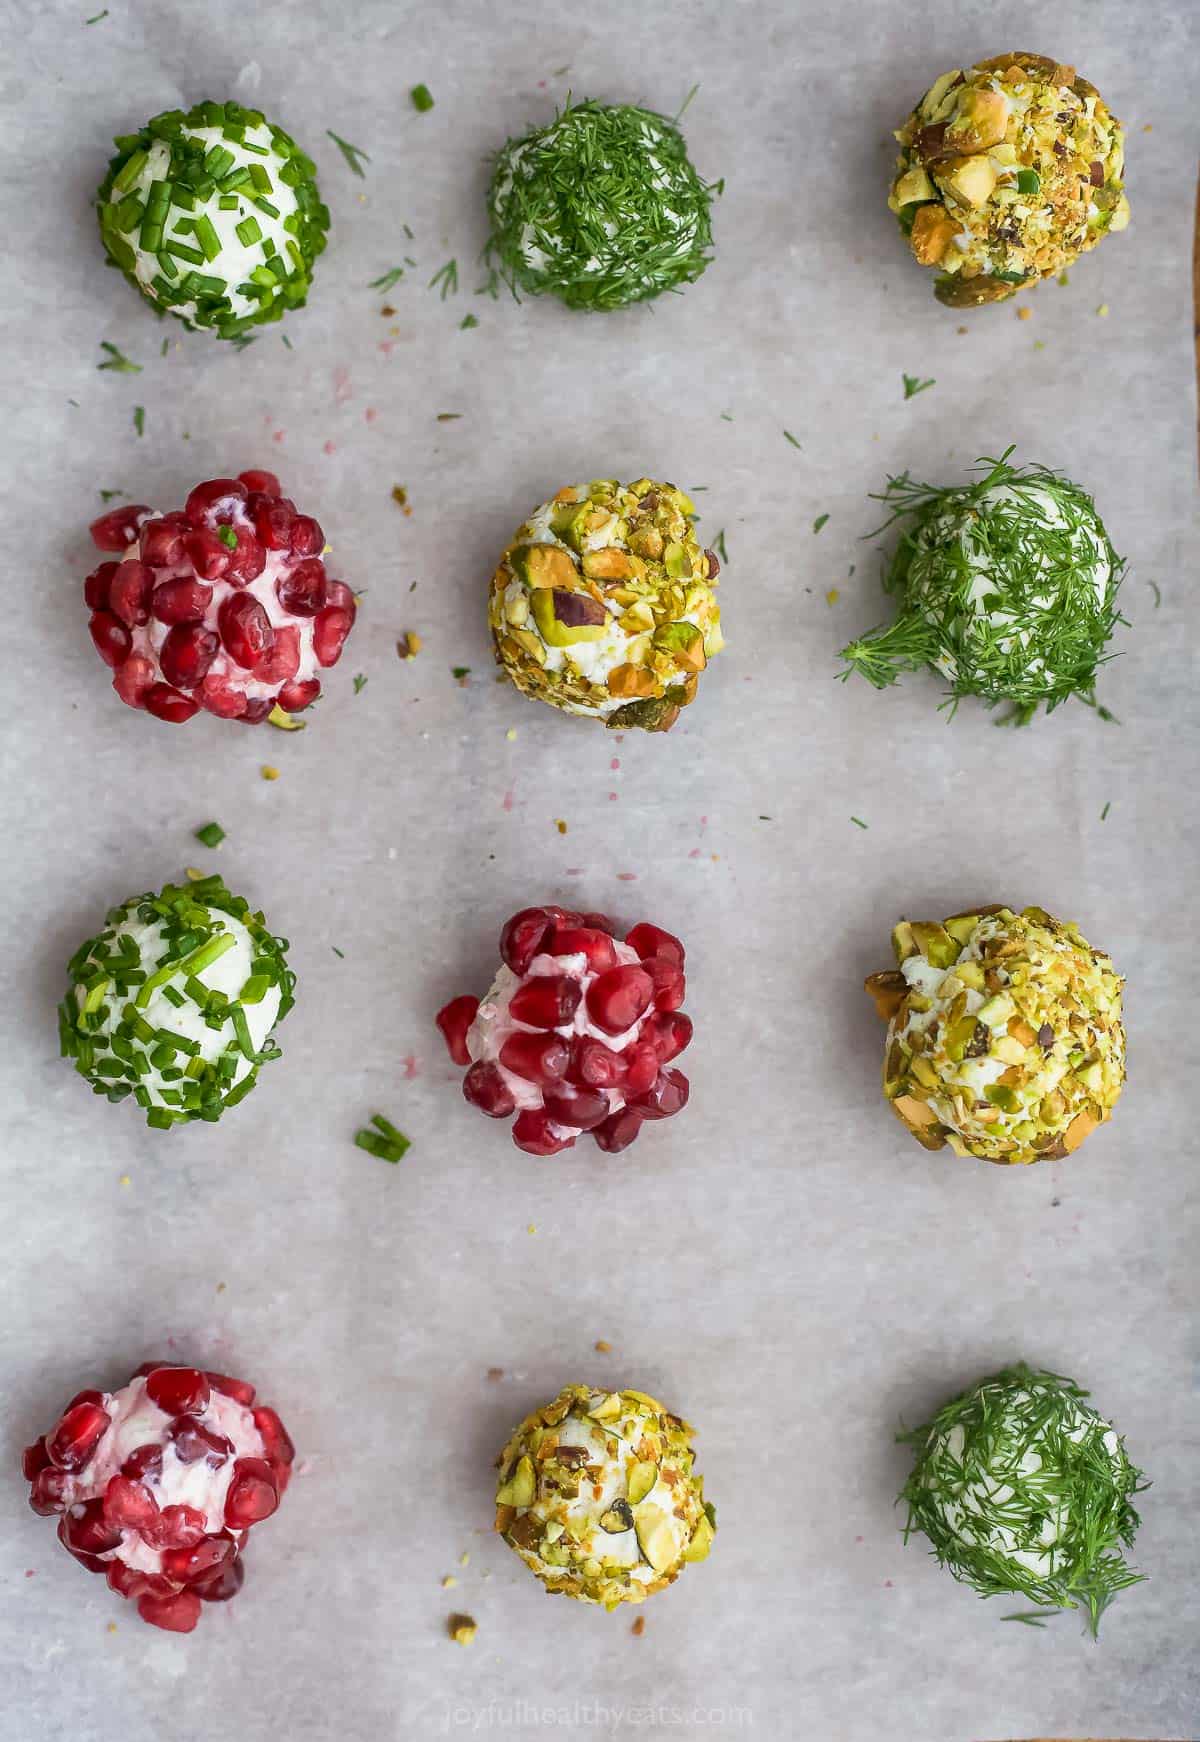 Cheeseballs with various toppings lined up on a sheet of parchment paper and shown from above